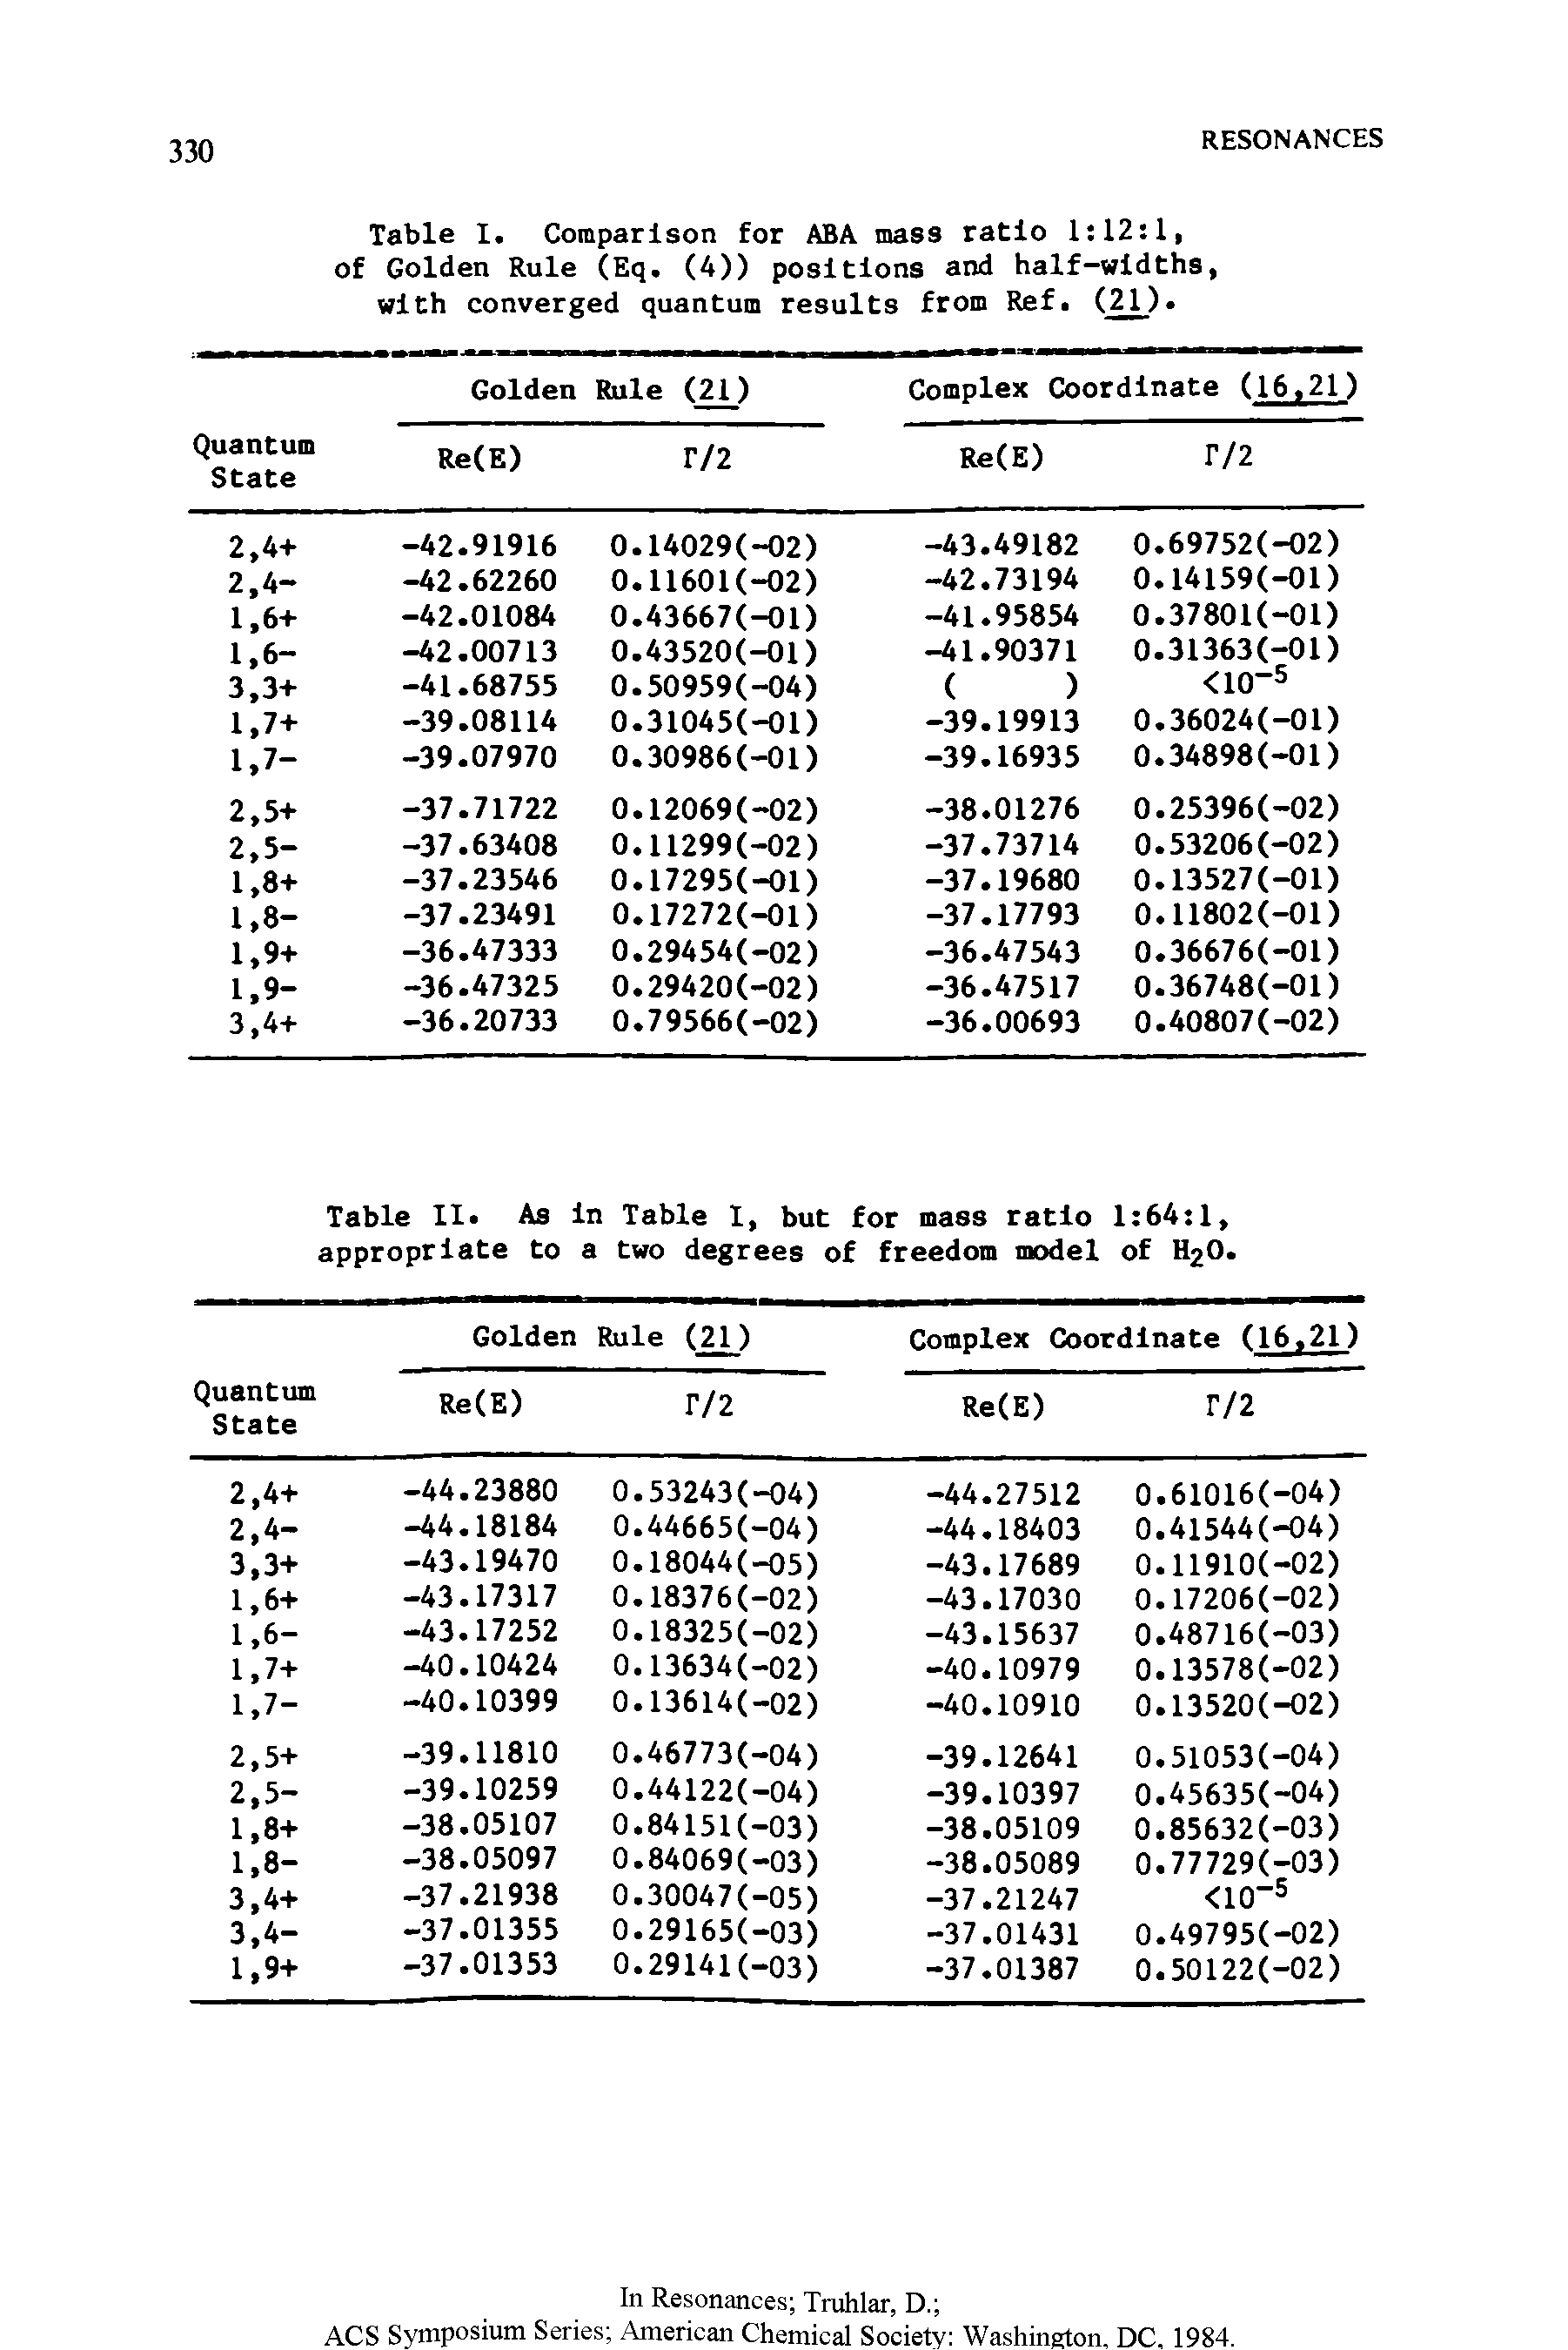 Table II As In Table I, but for mass ratio 1 64 1, appropriate to a two degrees of freedom model of H2O.